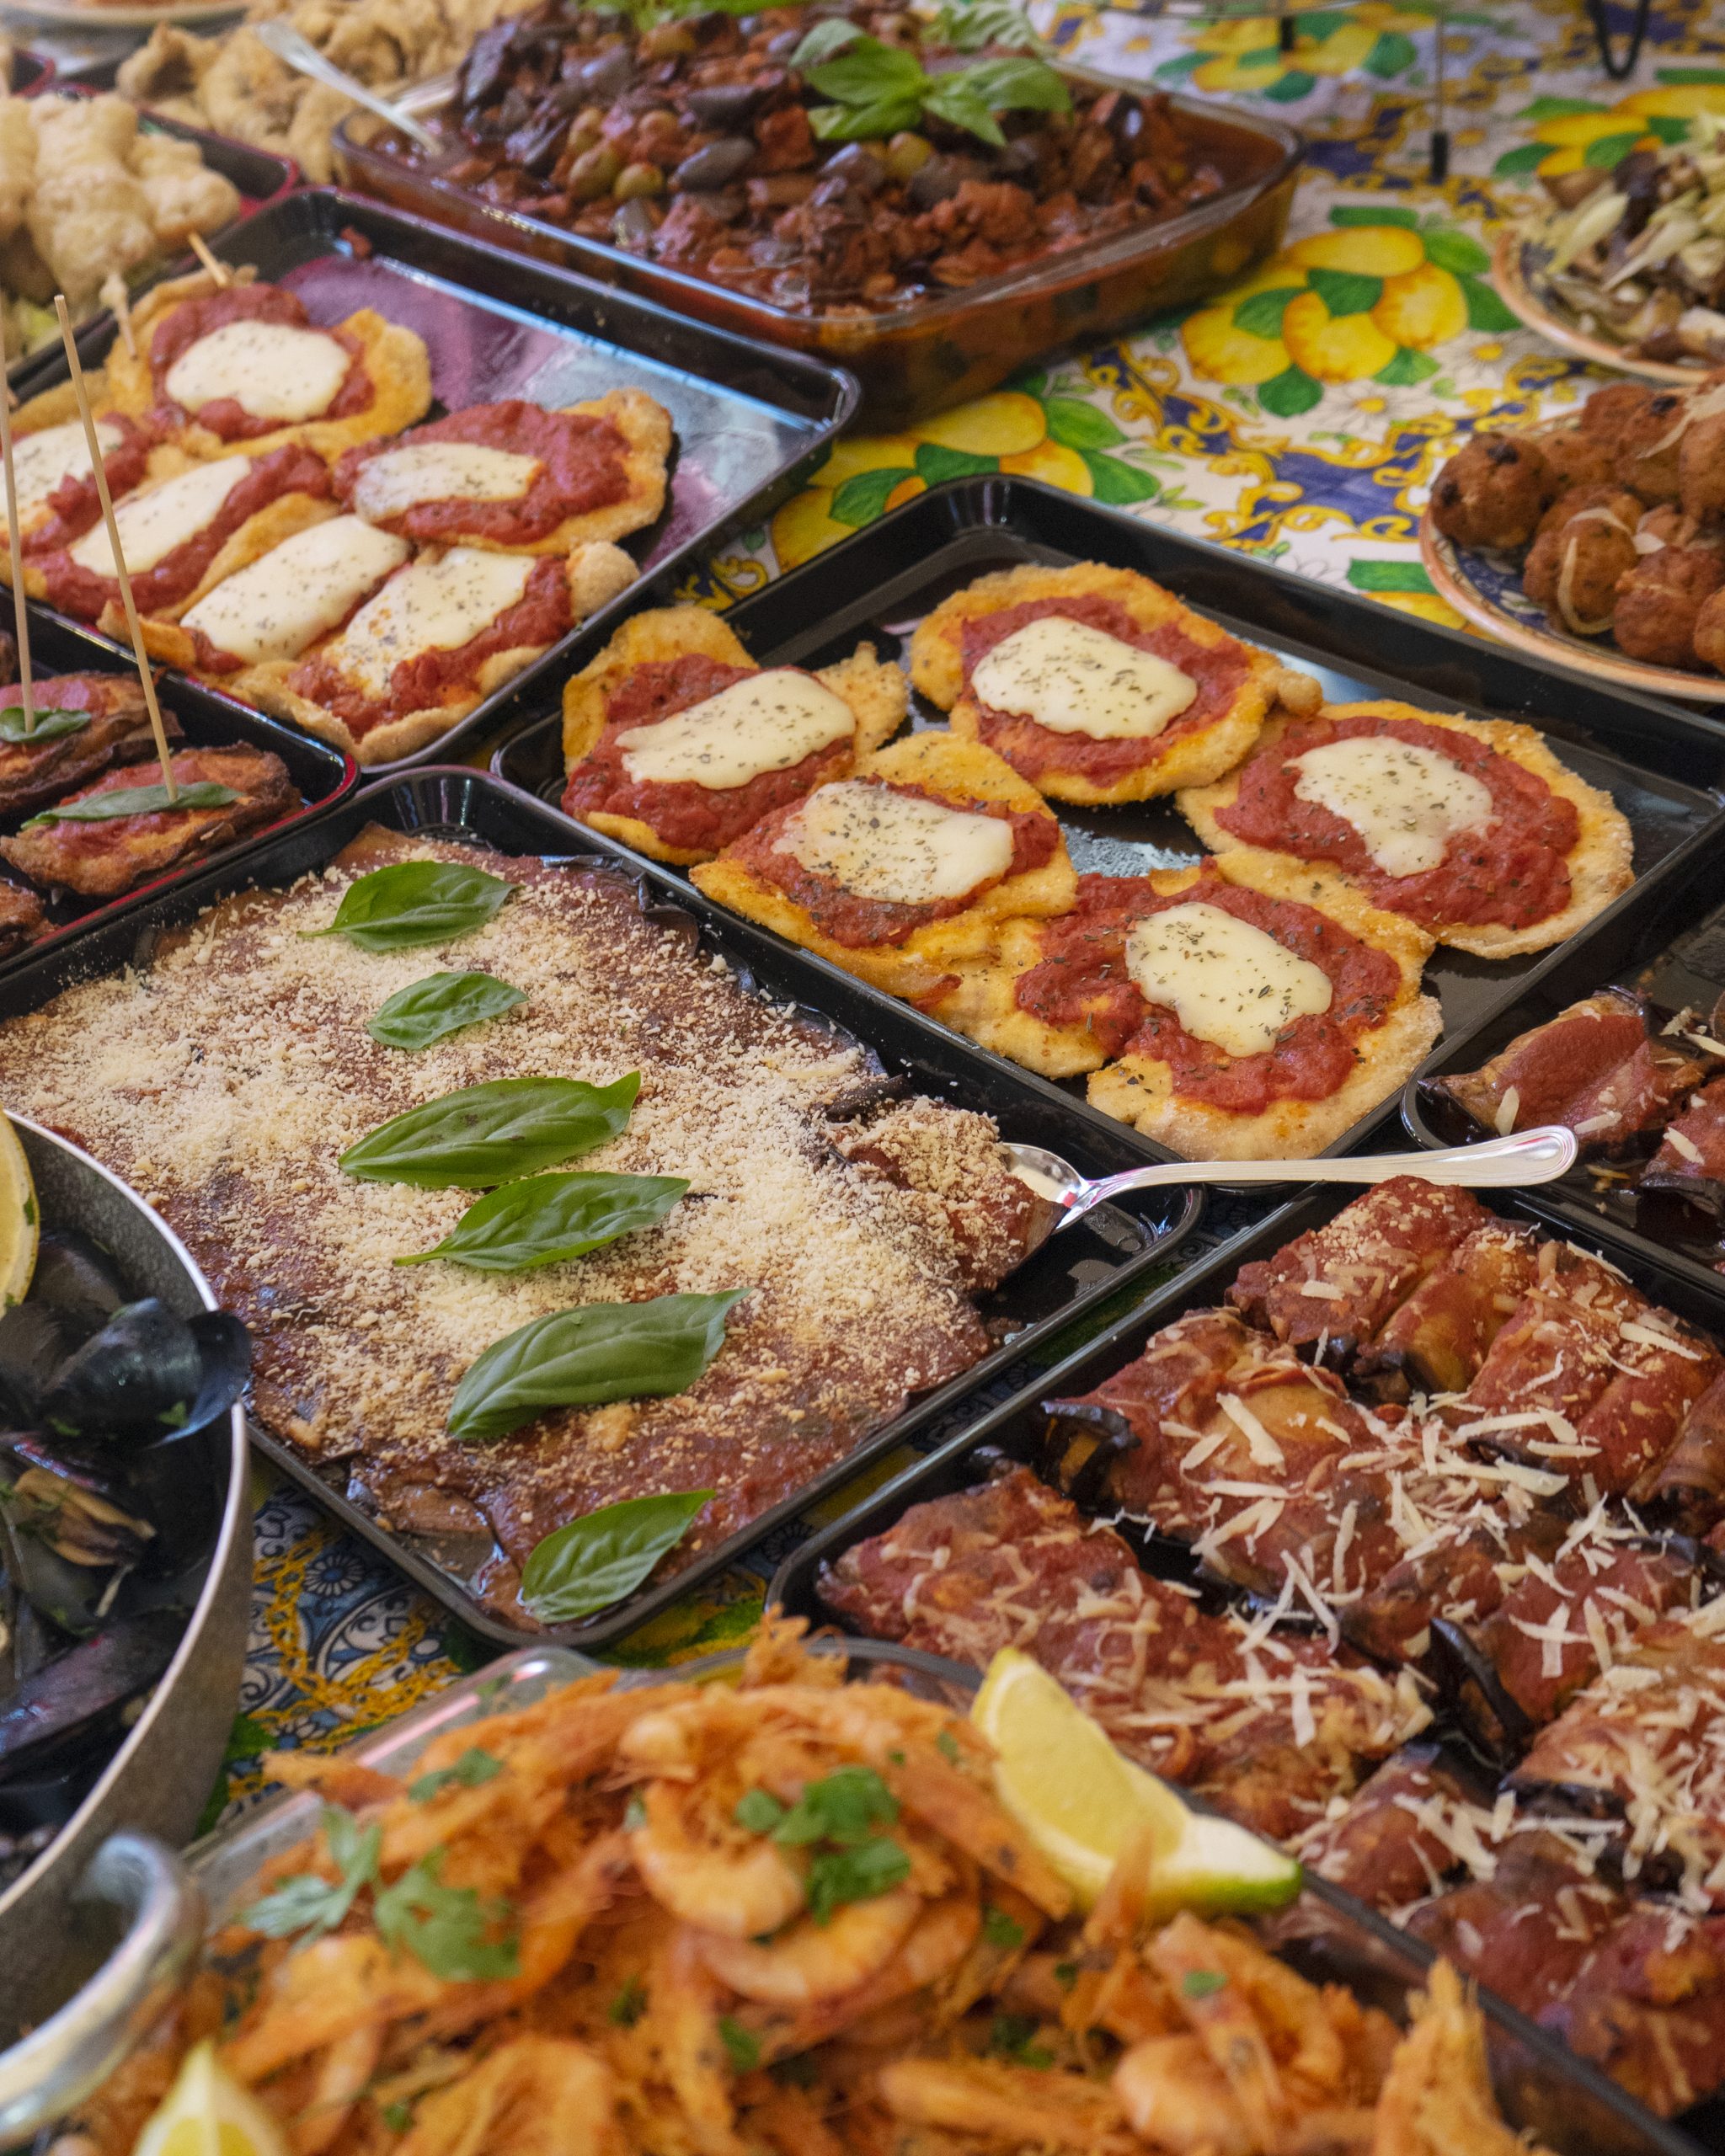 Discover the flavors of Sicily in a traditional market in the center of Palermo